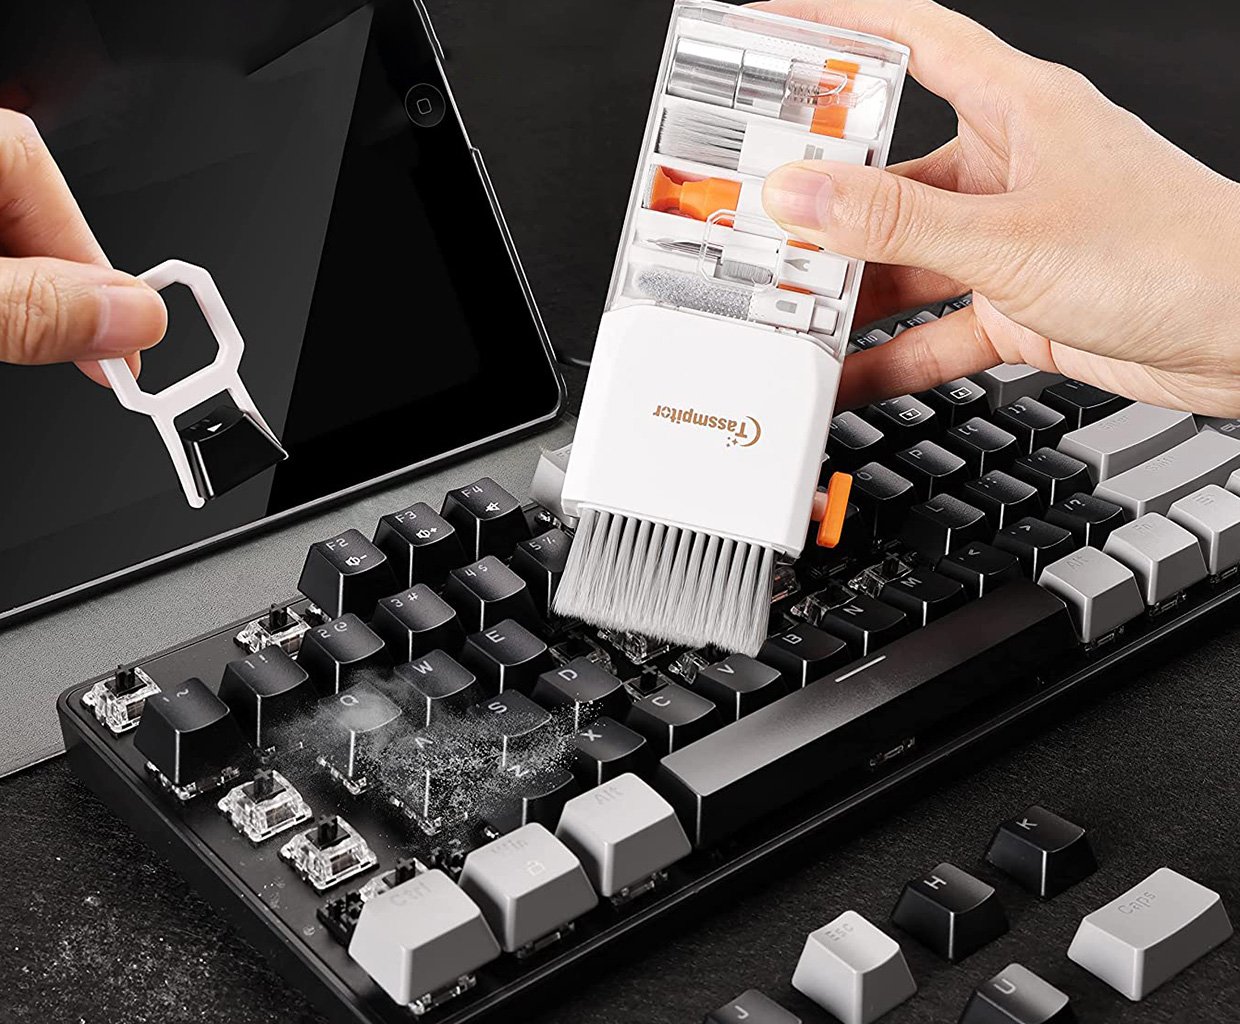 10-in-1 Keyboard + Electronics Cleaning Kit